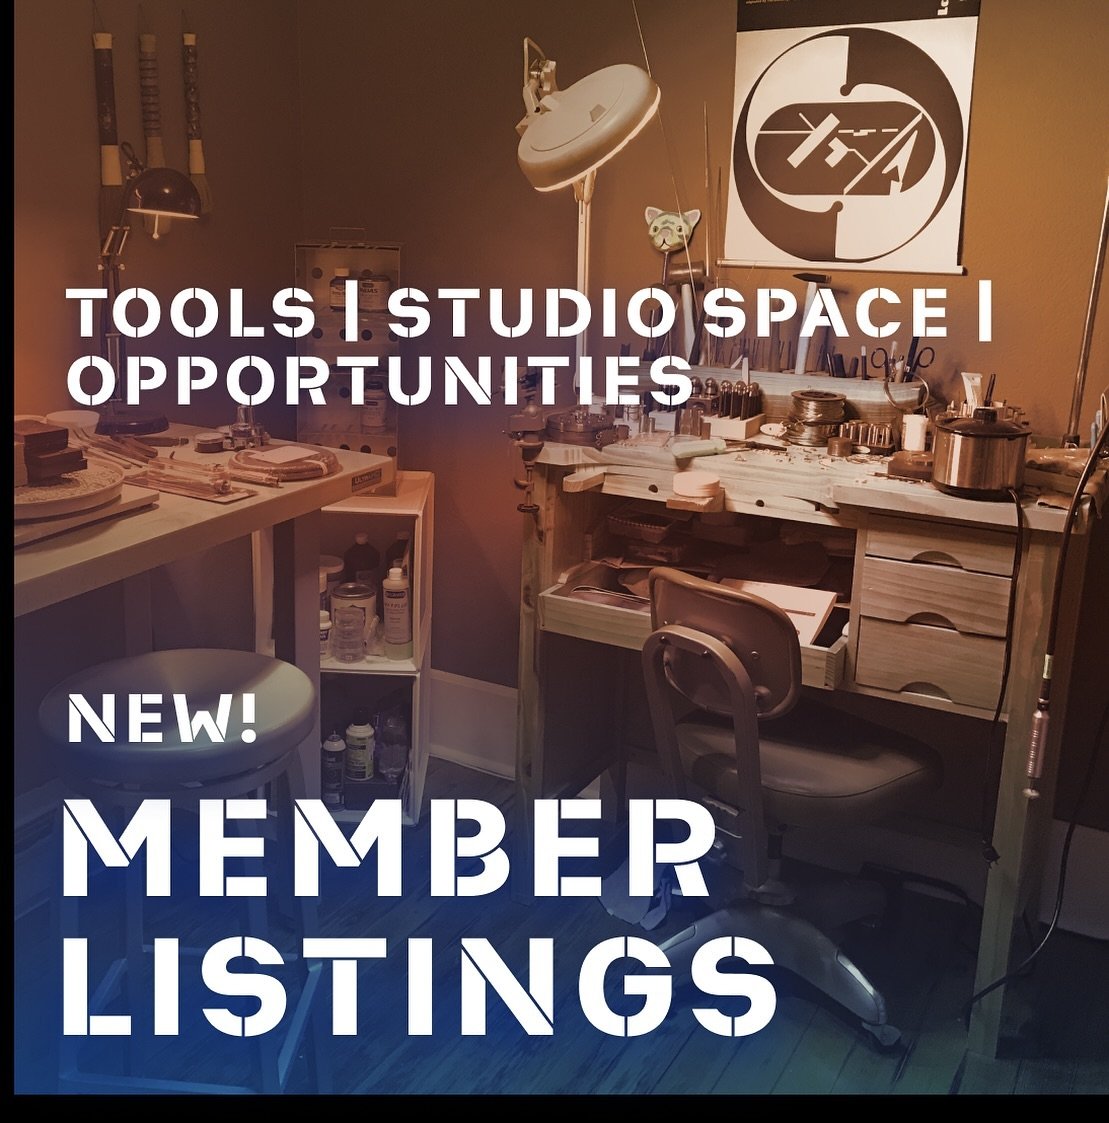 Members, we now offer a classifieds section on our website, where you&rsquo;re welcome to list opportunities, items for sale, or studio space for rent. Listings are currently only visible to members, though we may choose to feature them here on socia